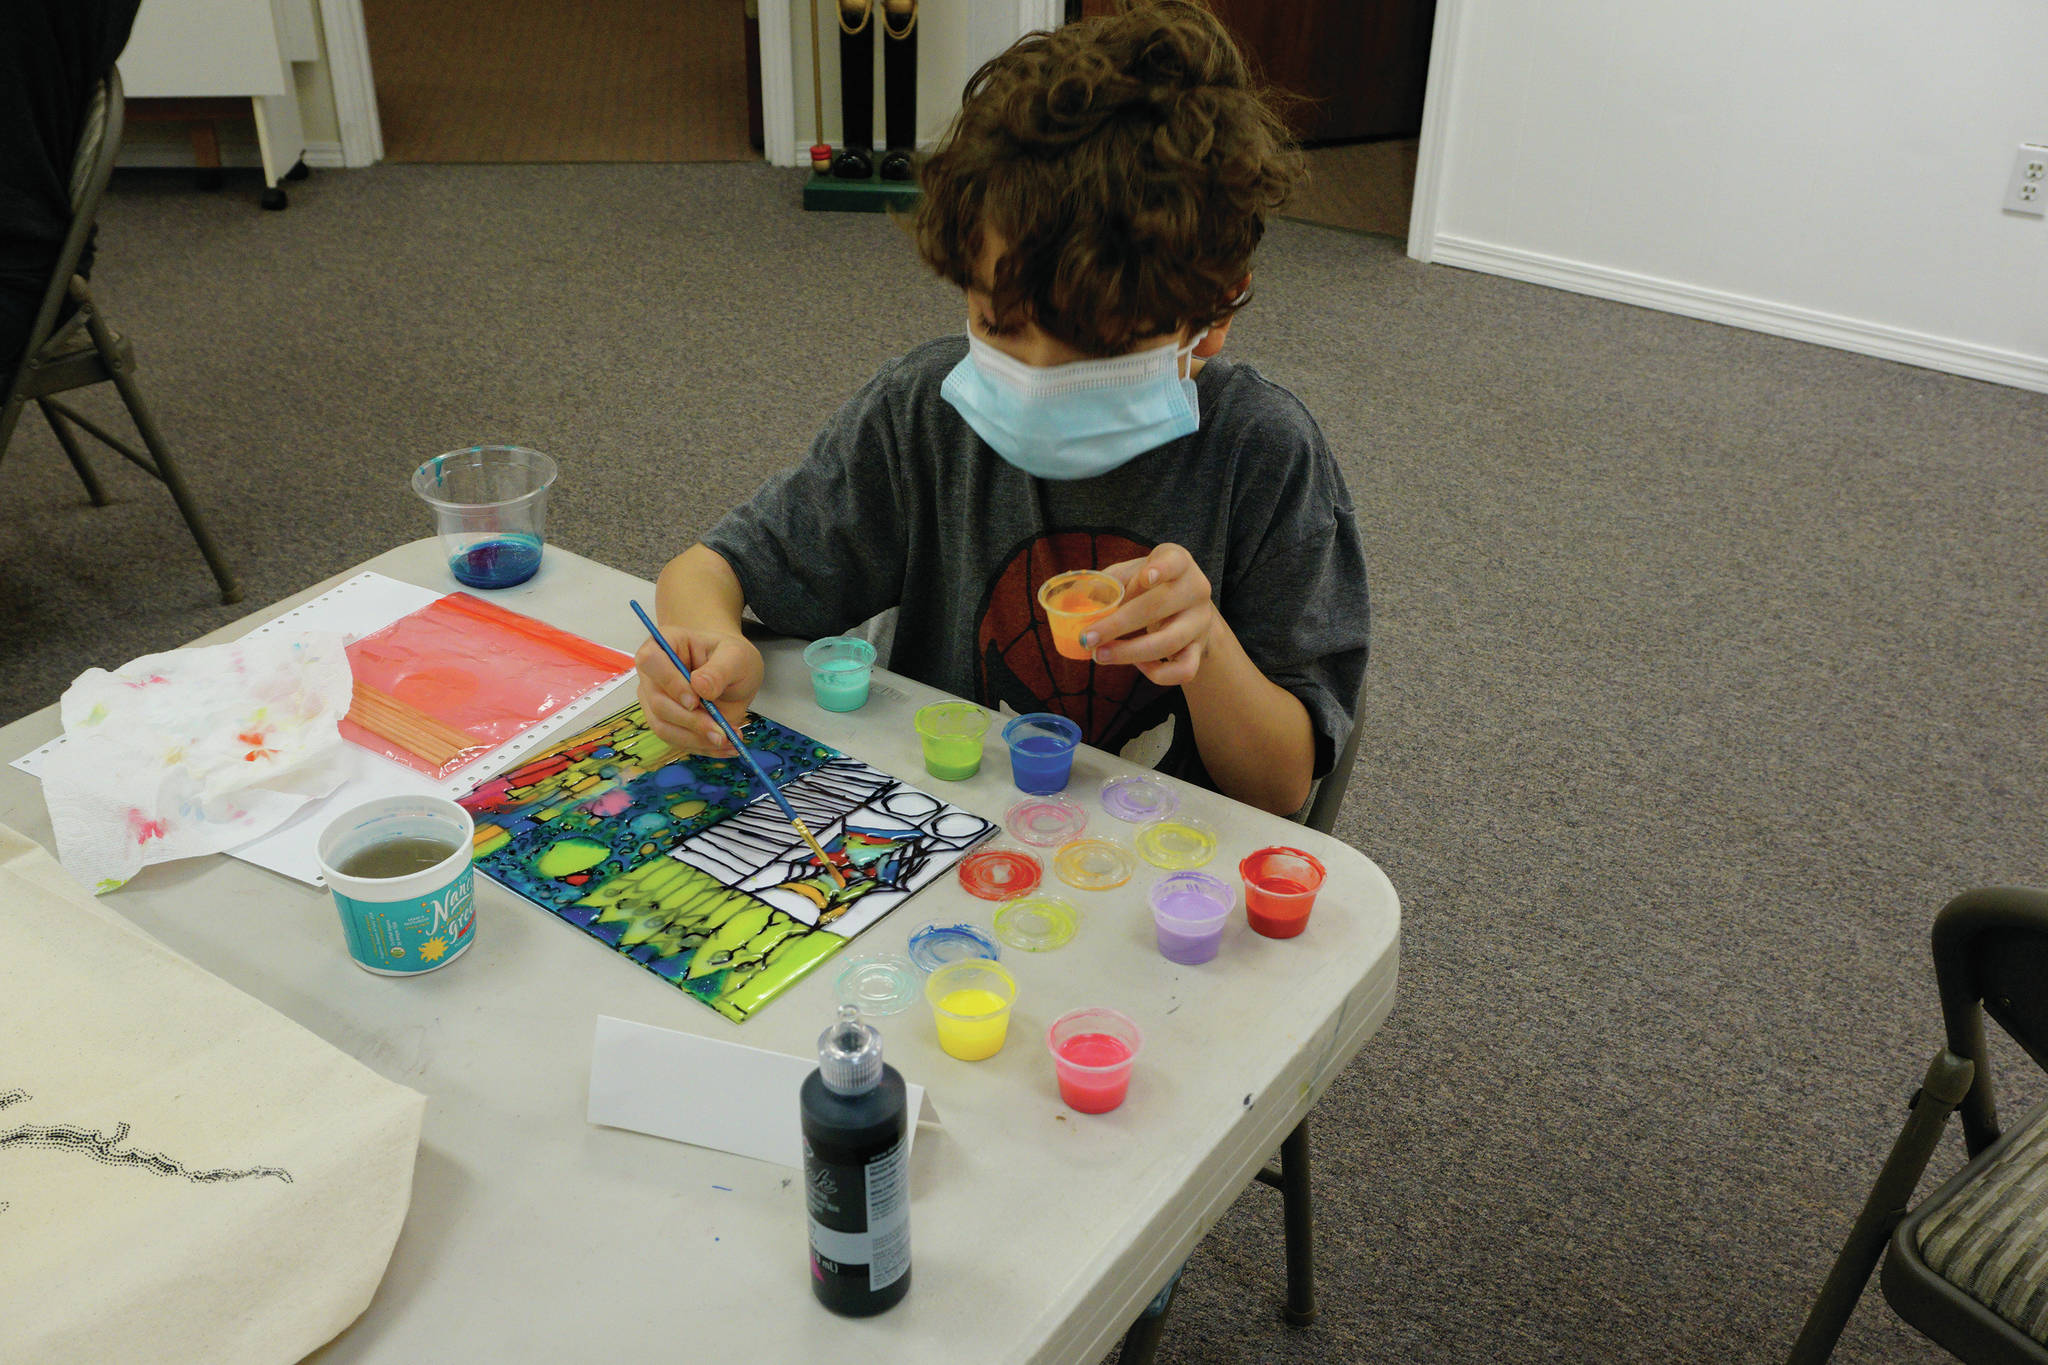 Ryder Chase, age 9, works on faux stained glass in Amy Komar's socially-distant Art a la Carte class last Friday at the Homer Council on the Arts. Children in the class wore masks and worked at either end of long tables spaced apart. The young artists also made large origami stars that will be placed in store windows "for a dose of color therapy for the community," Komar said. (Photo by Michael Armstrong/Homer News)